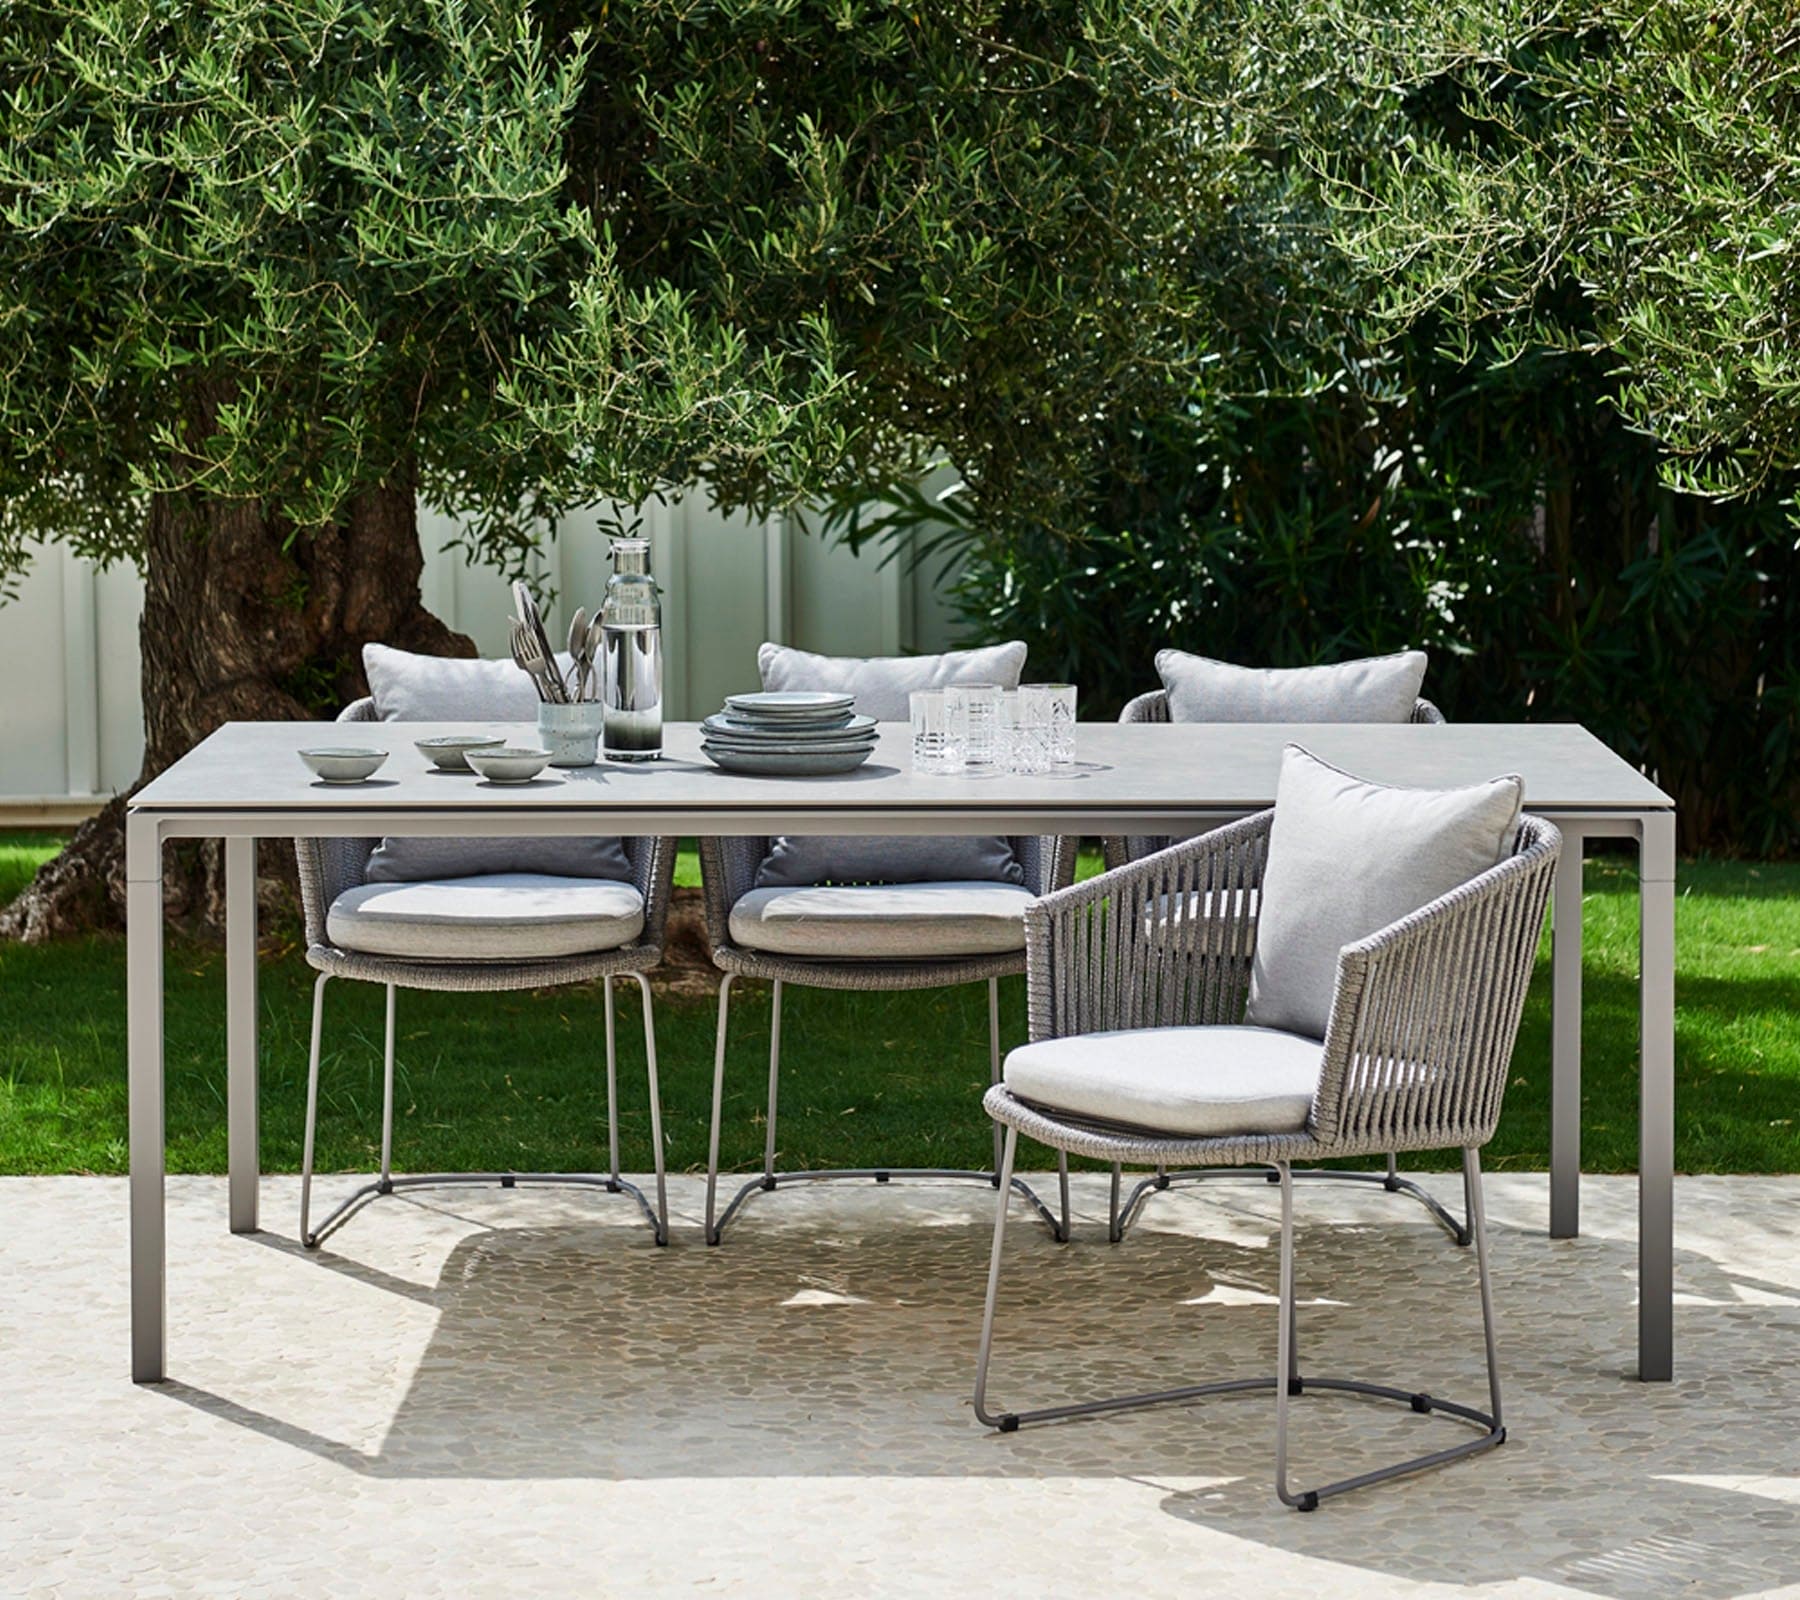 Boxhill's Moments Outdoor Dining Armchair lifestyle image with dining table with random things on top at patio